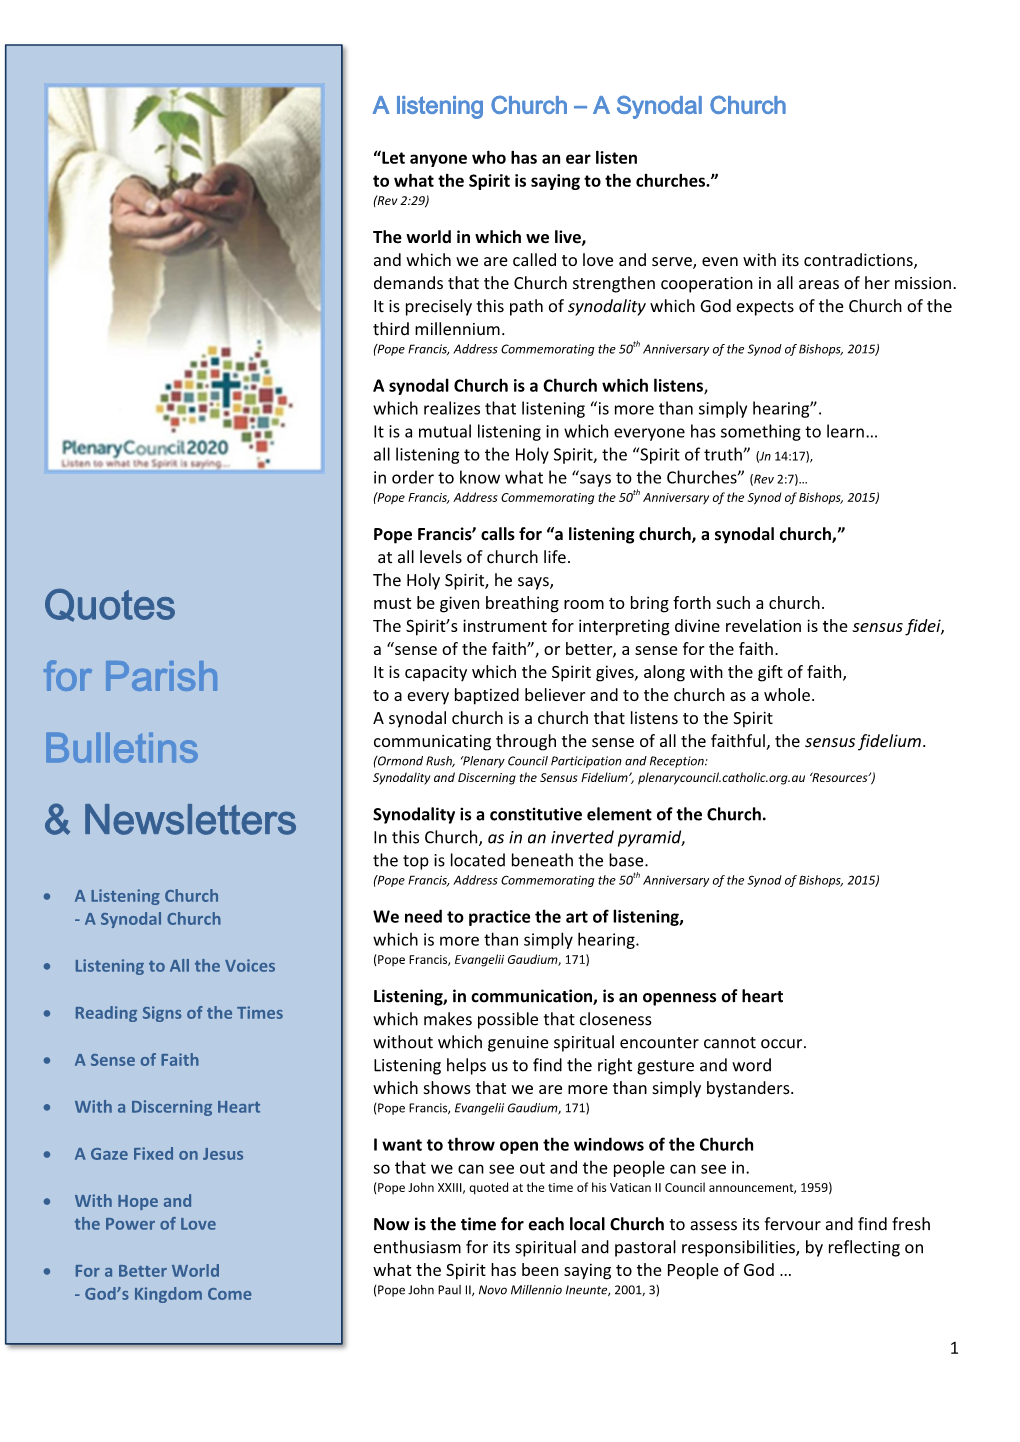 Quotes for Parish Bulletins & Newsletters